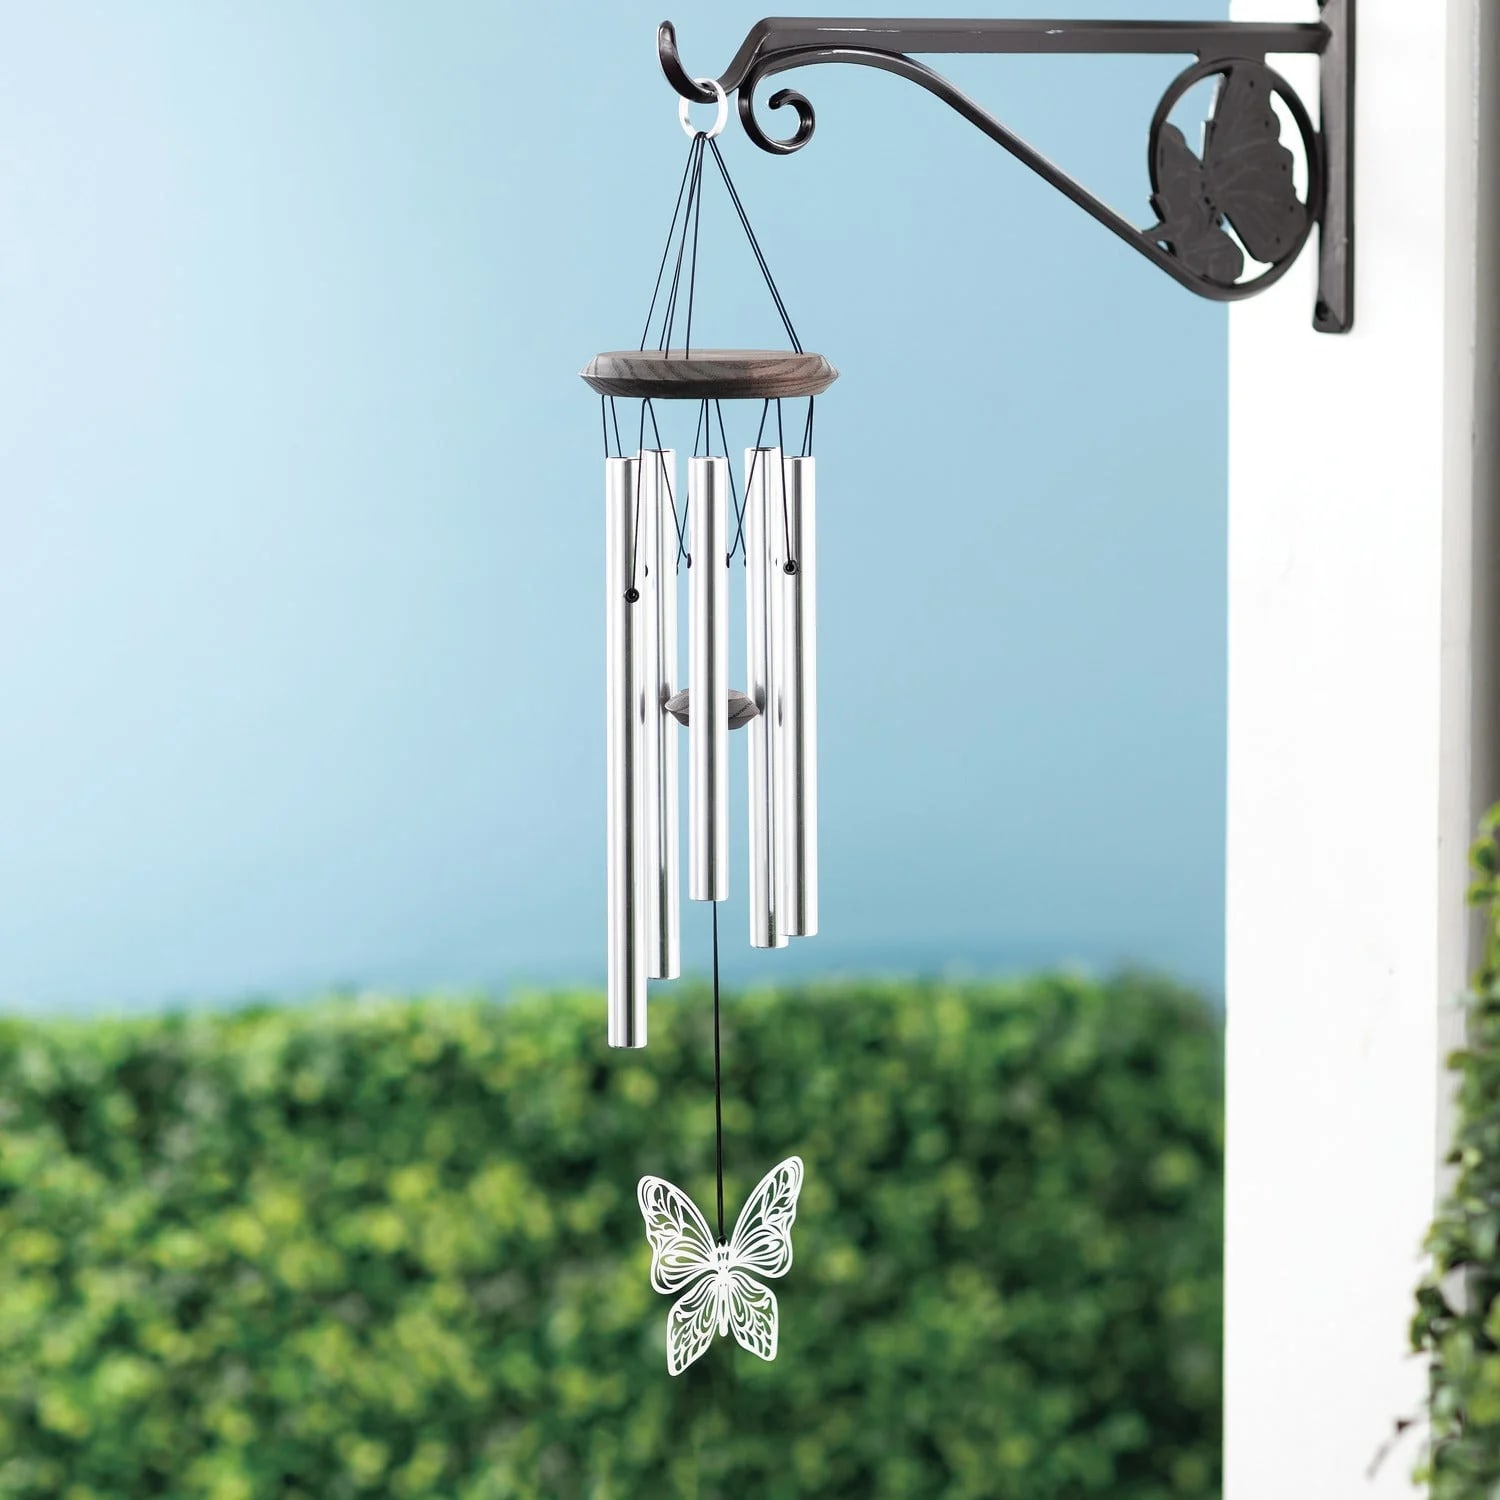 Woodstock Butterfly Windchime  - Teak finish ash wood 5 silver aluminum tubes Stainless steel ornament Overall Length: 21 inches